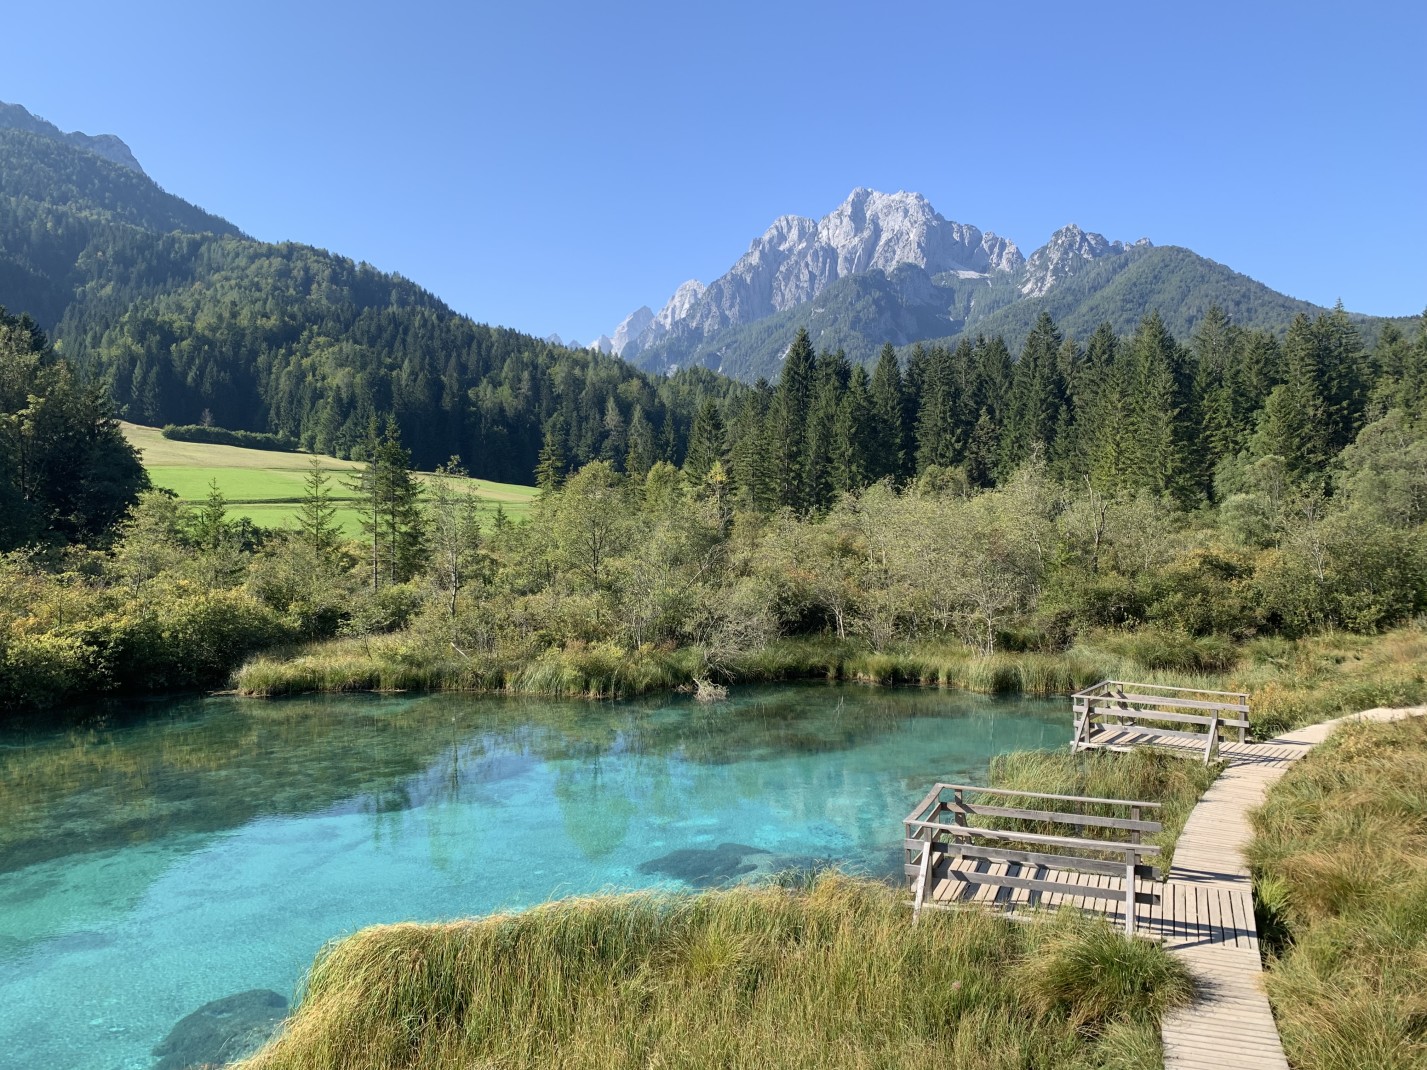 Blue body of water next to wooden path with mountains in the background during daytime